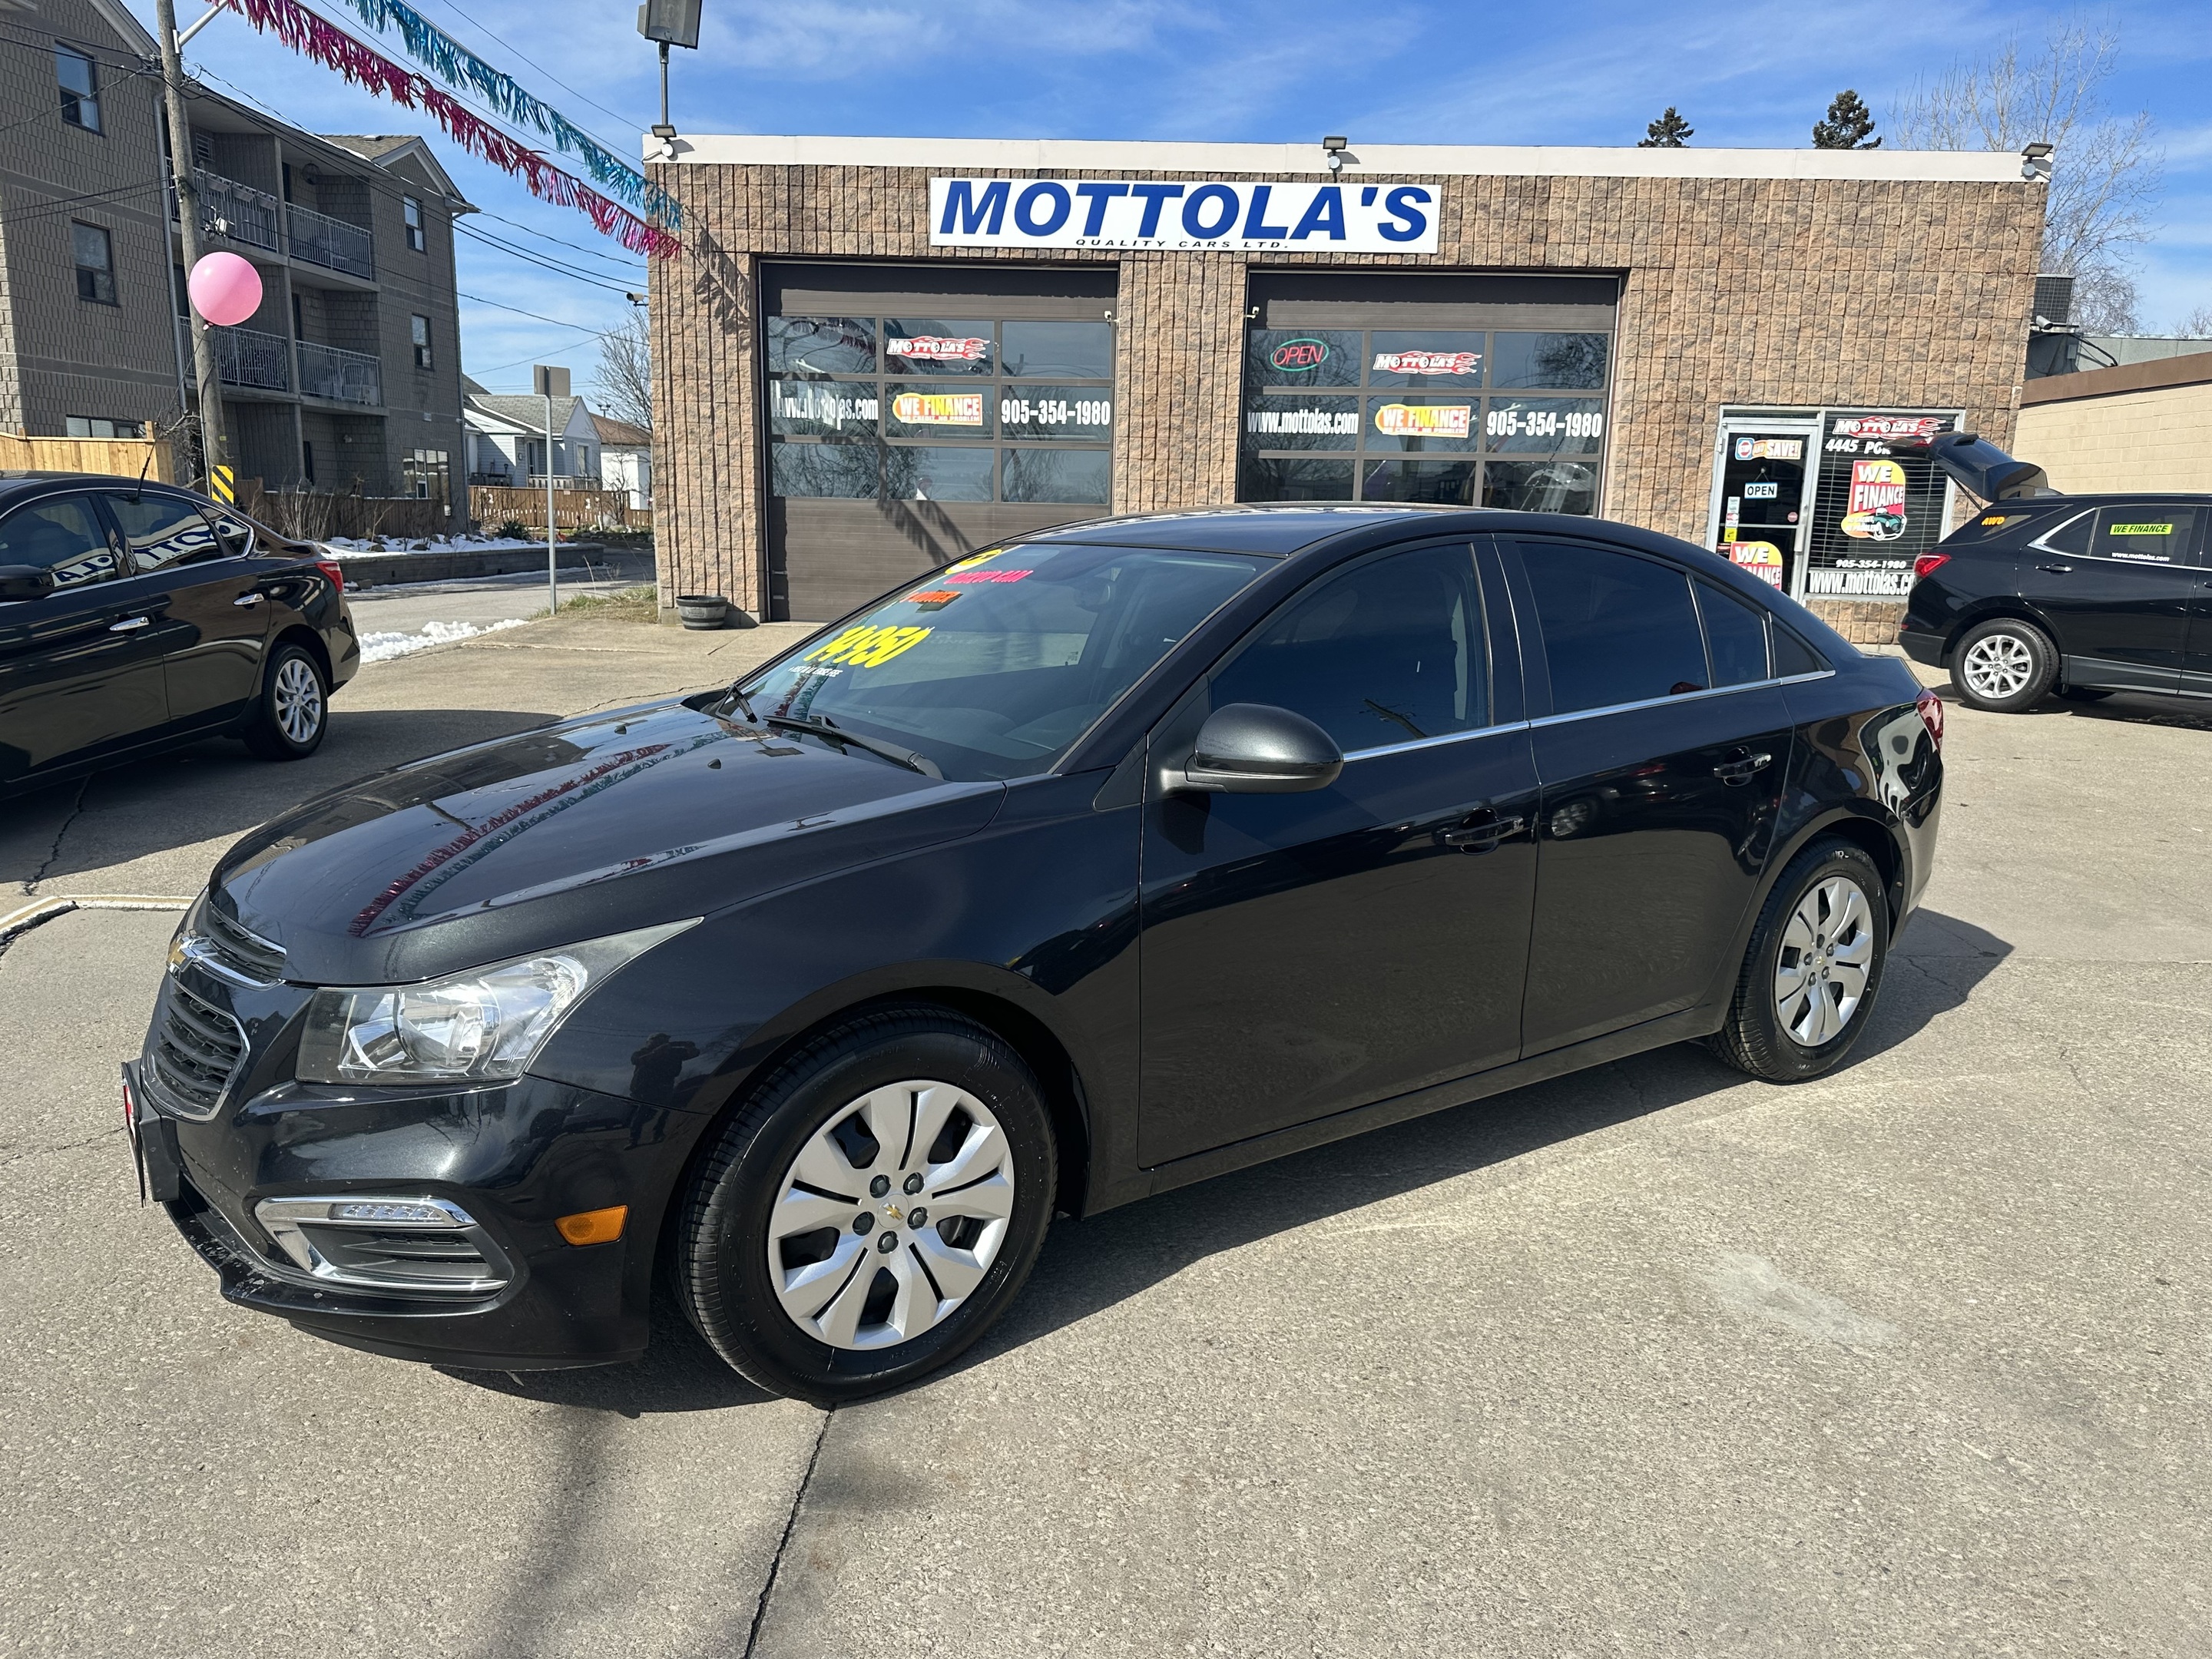 2016 Chevrolet Cruze 4dr Sdn LT   AUTOMATIC  95000 KMS